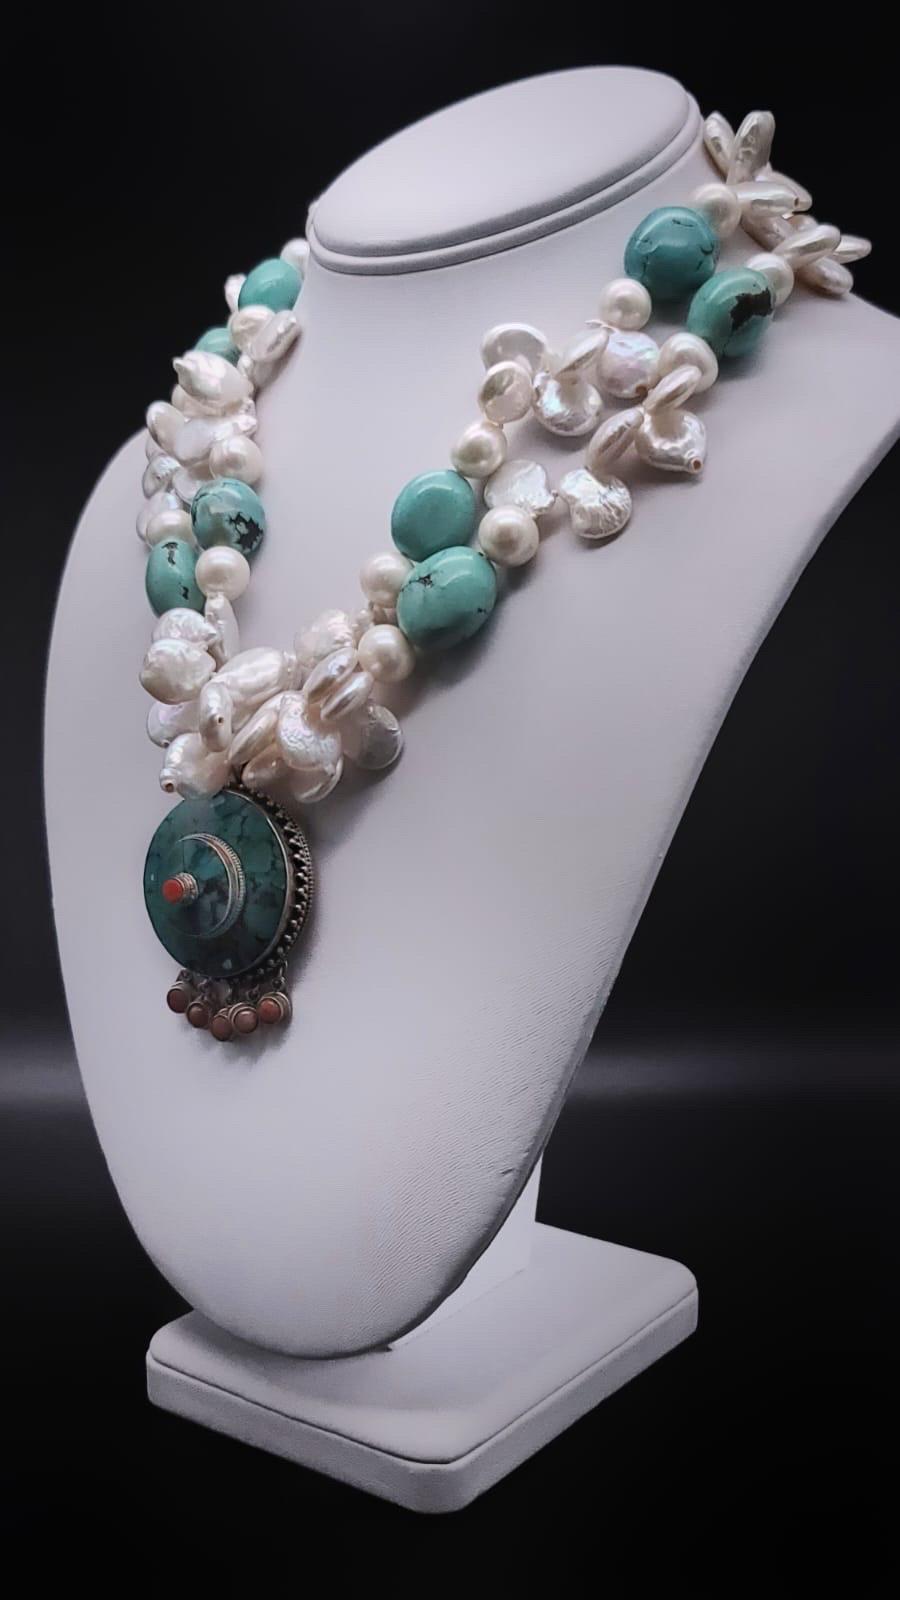 One-of-a-Kind

Flattering 2 strands mixed Pearl and Turquoise necklace. The necklace surrounds an inlaid Nepal Sterling Silver pendant inlaid with turquoise with typical Silver dangles. The Pearls are a mix of coin and 10 m.m. beads causing a